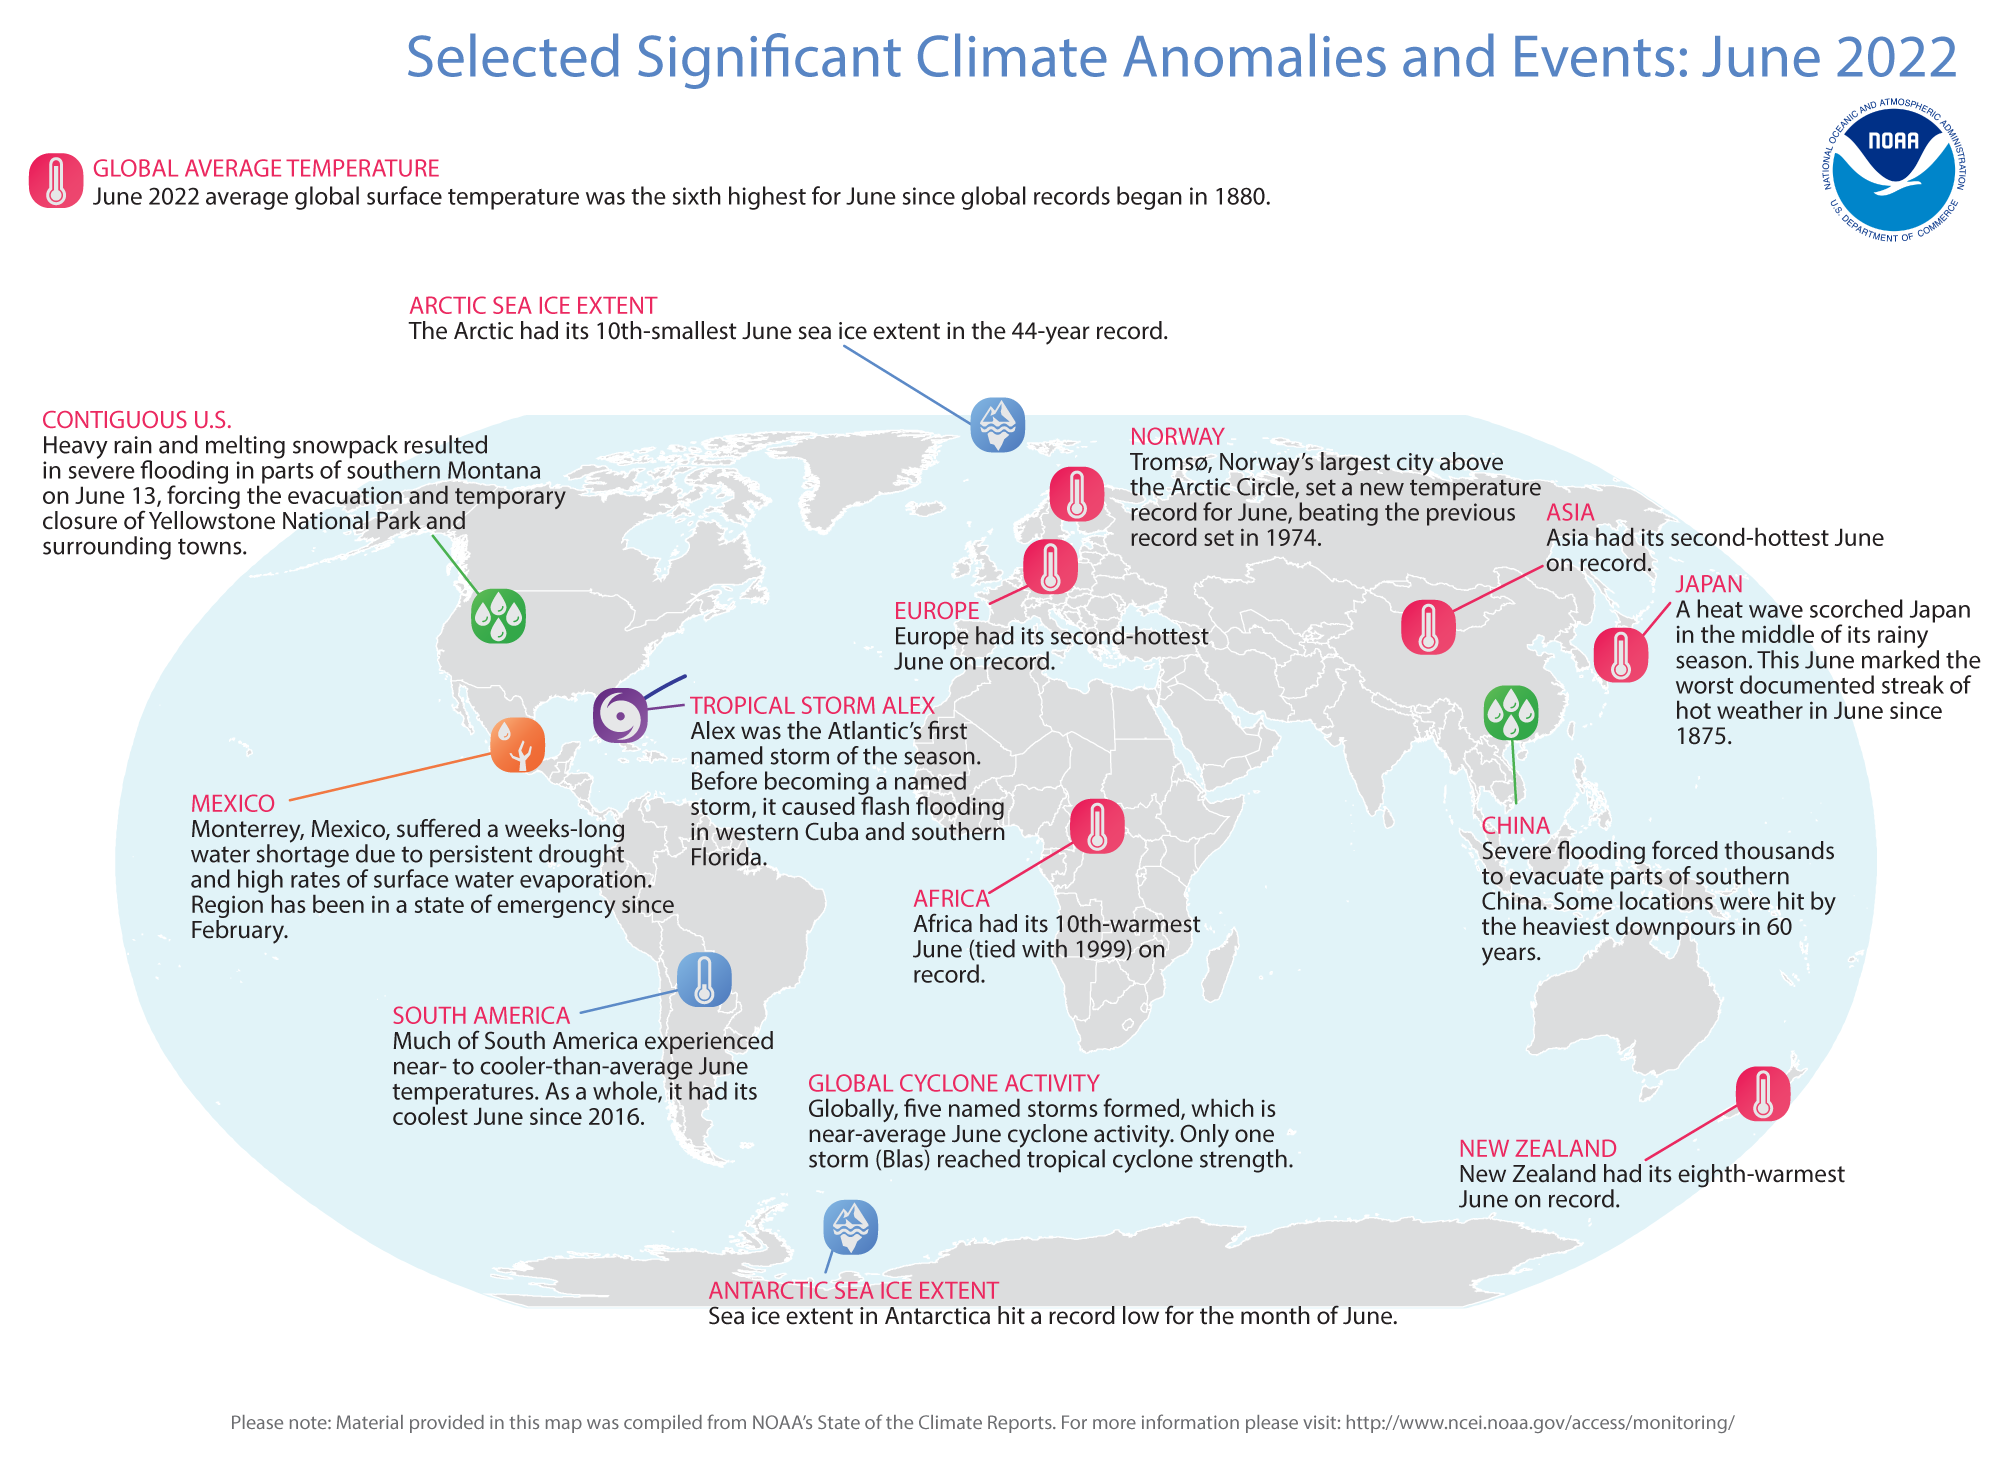 A map of the world plotted with some of the most significant climate events that occurred during June 2022.